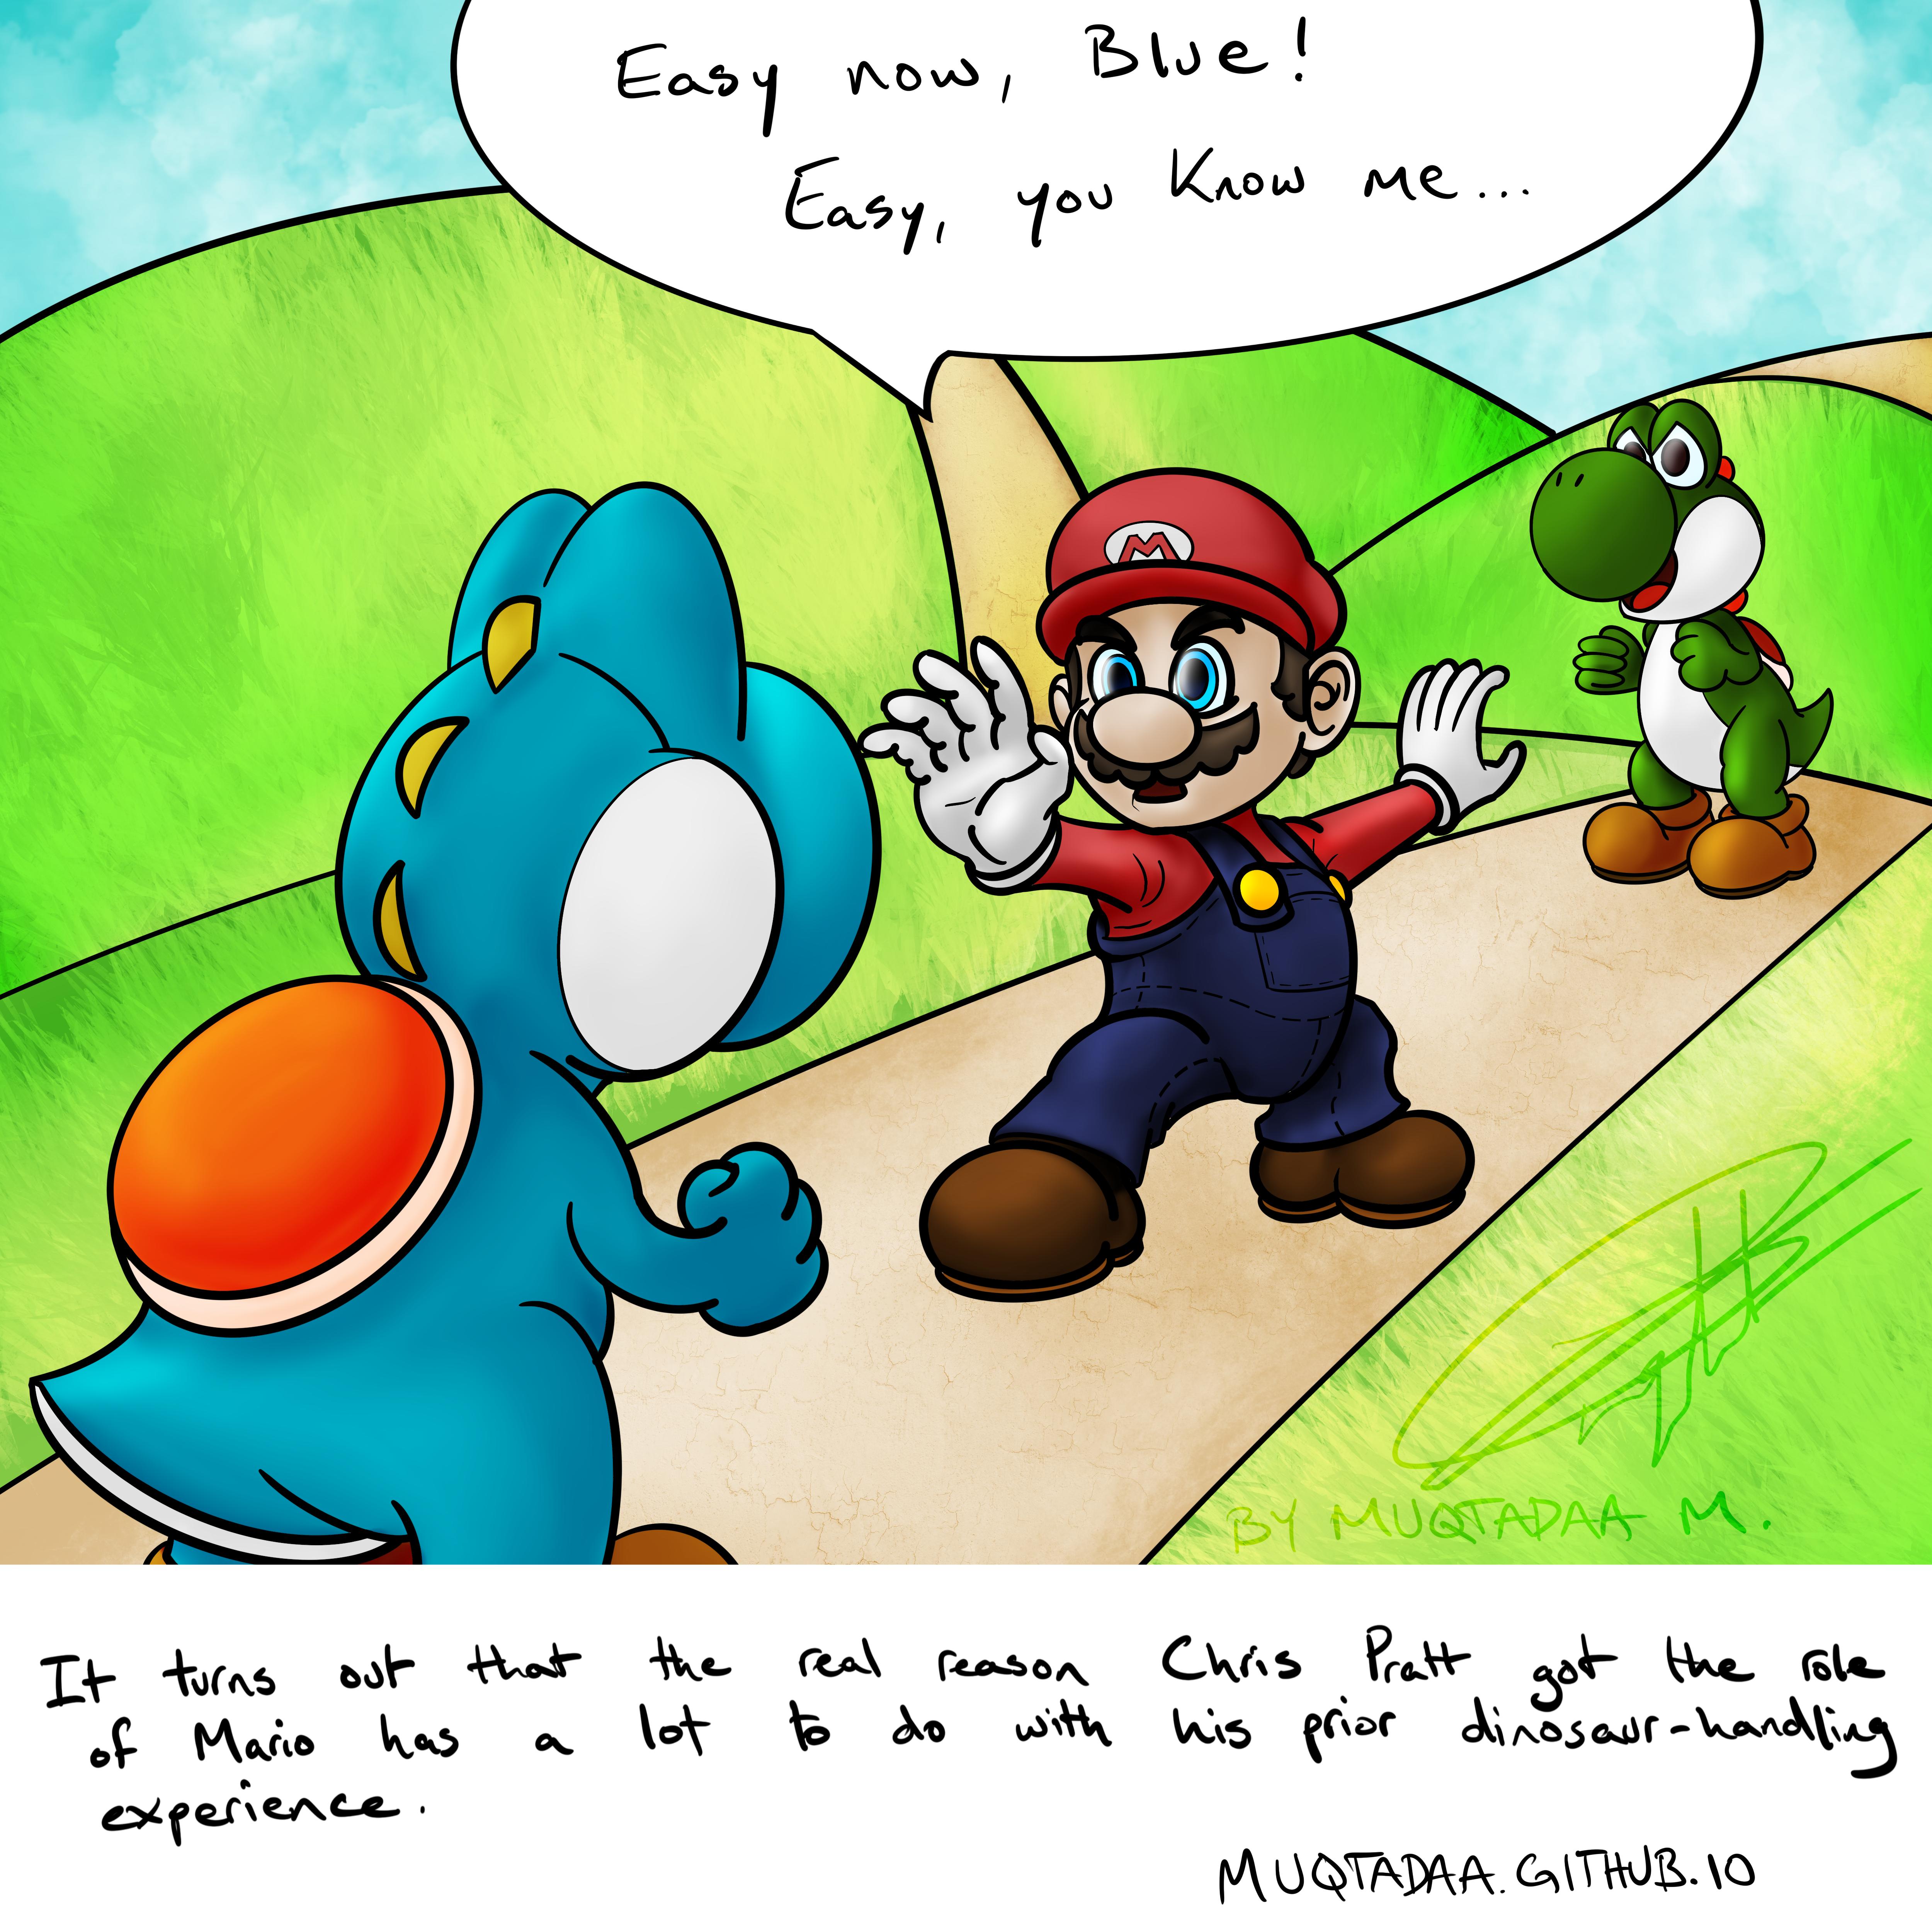 I drew this as a meme to post on Reddit, mocking the casting of Chris Pratt as the animated Mario. I think the caption is self-explanatory.